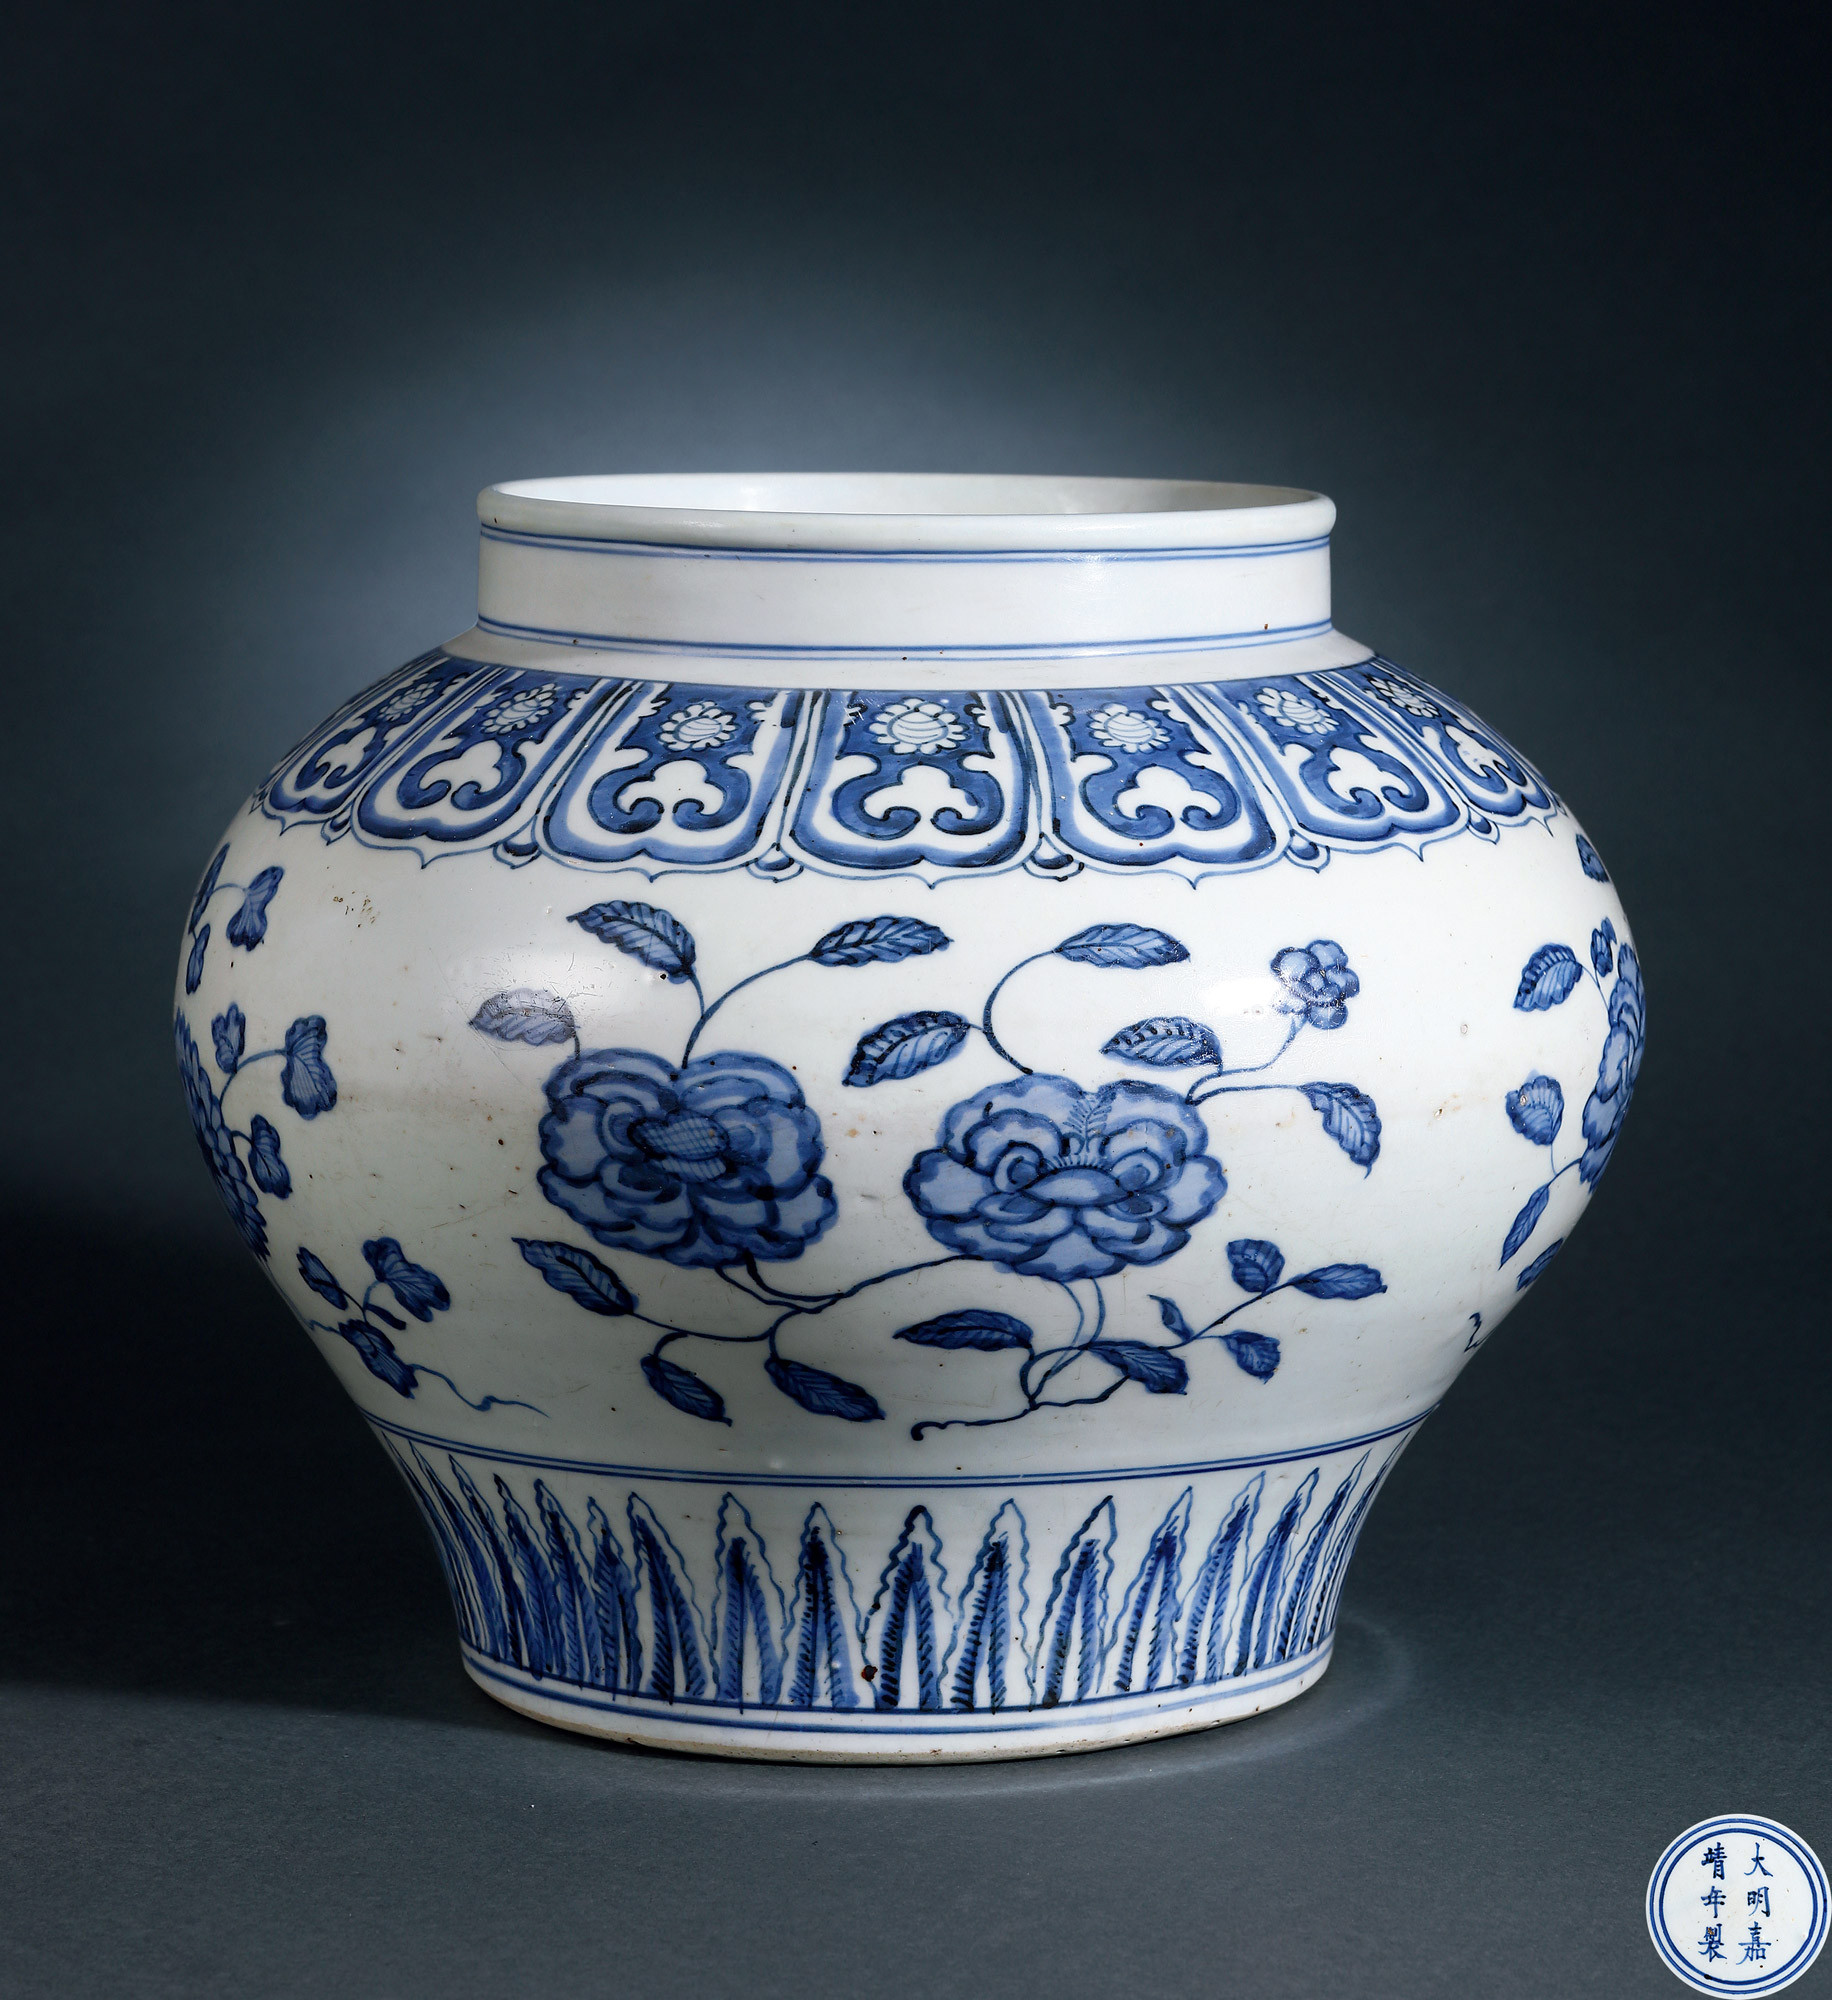 A BLUE AND WHITE JAR WITH FLOWERS DESIGN